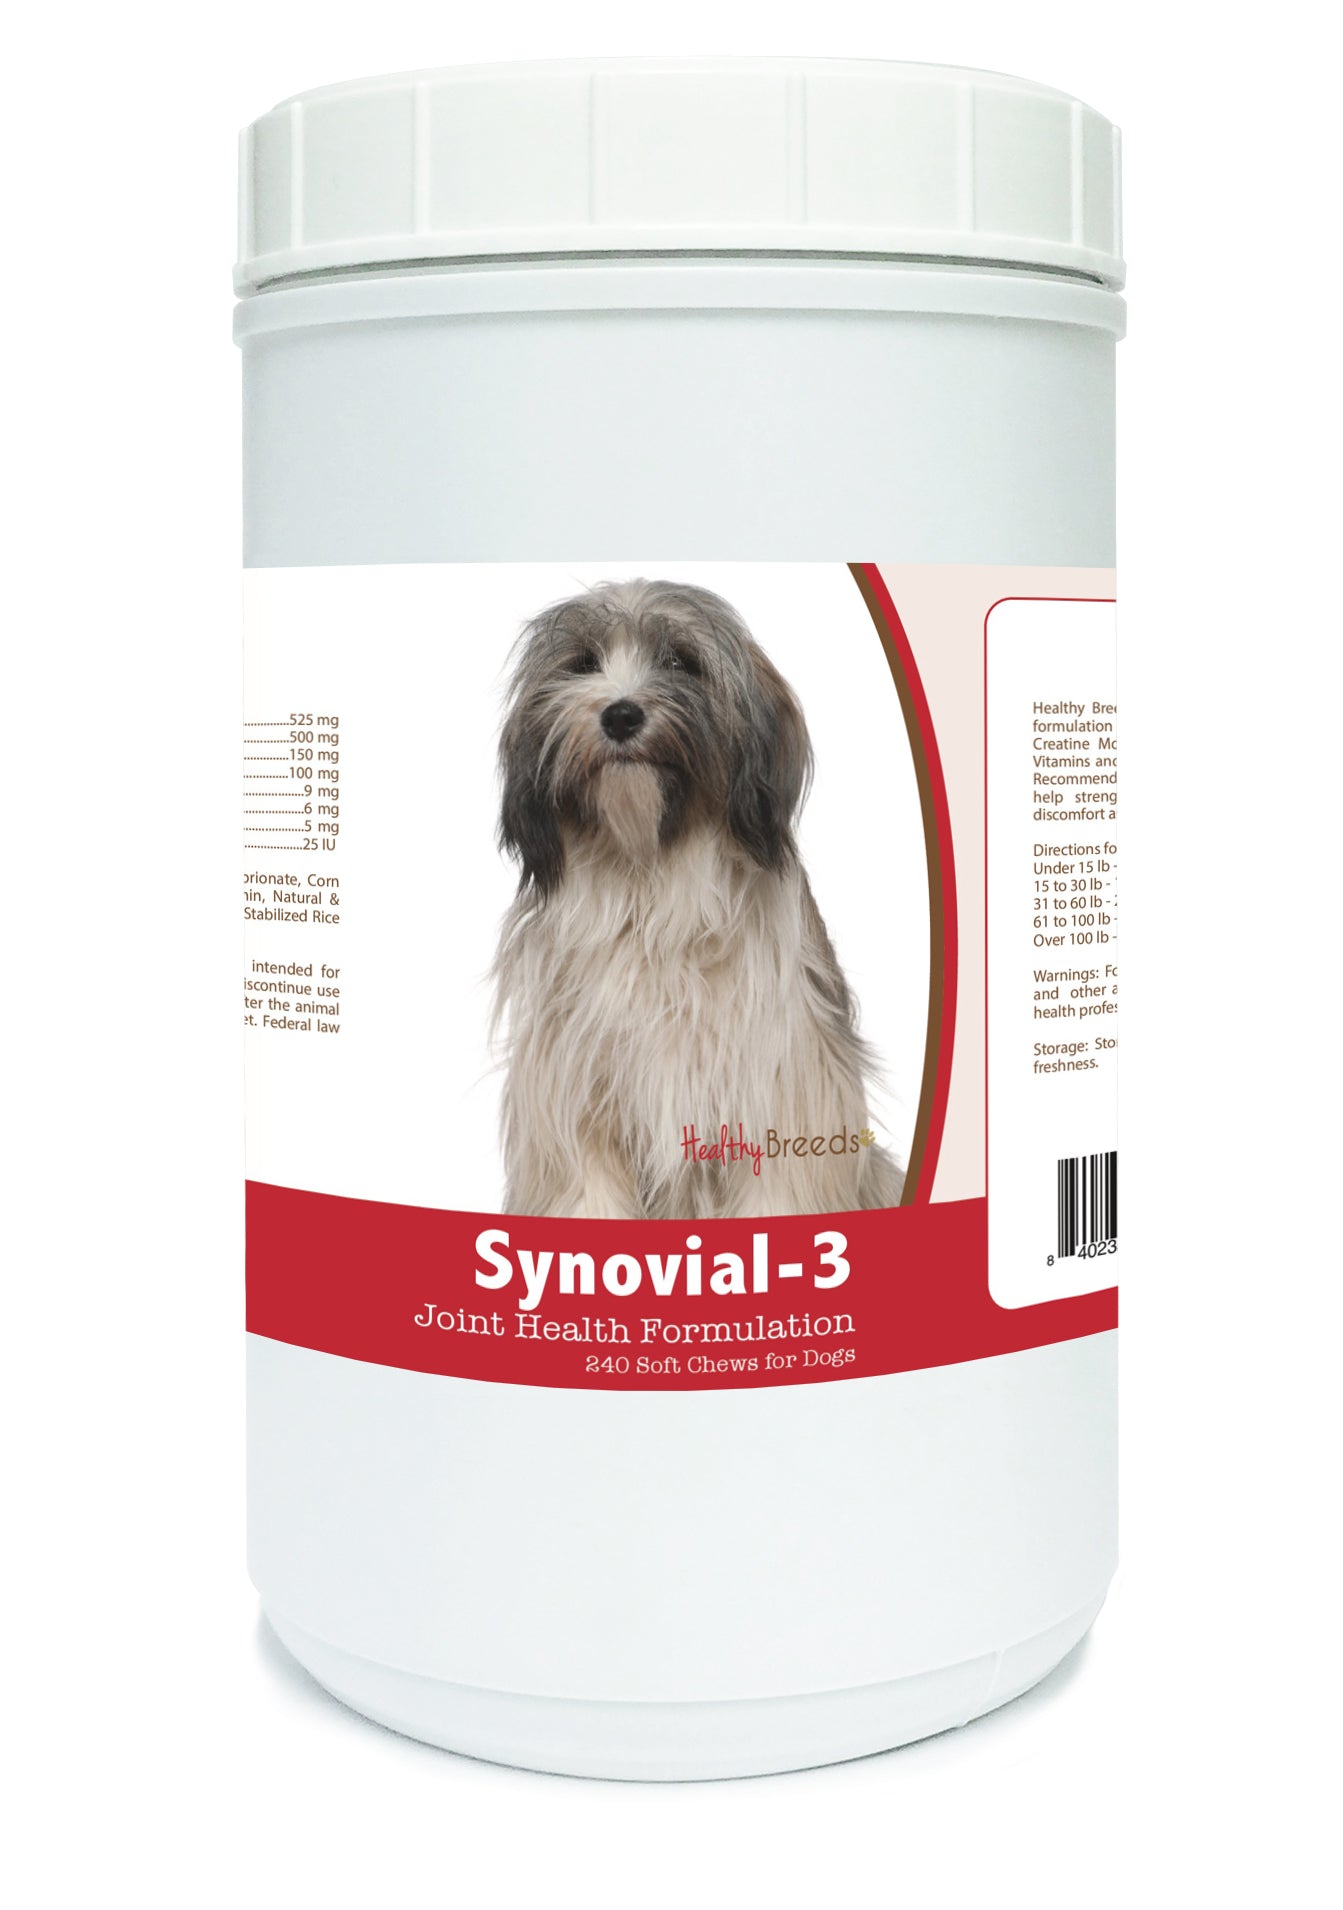 Tibetan Terrier Synovial-3 Joint Health Formulation Soft Chews 240 Count